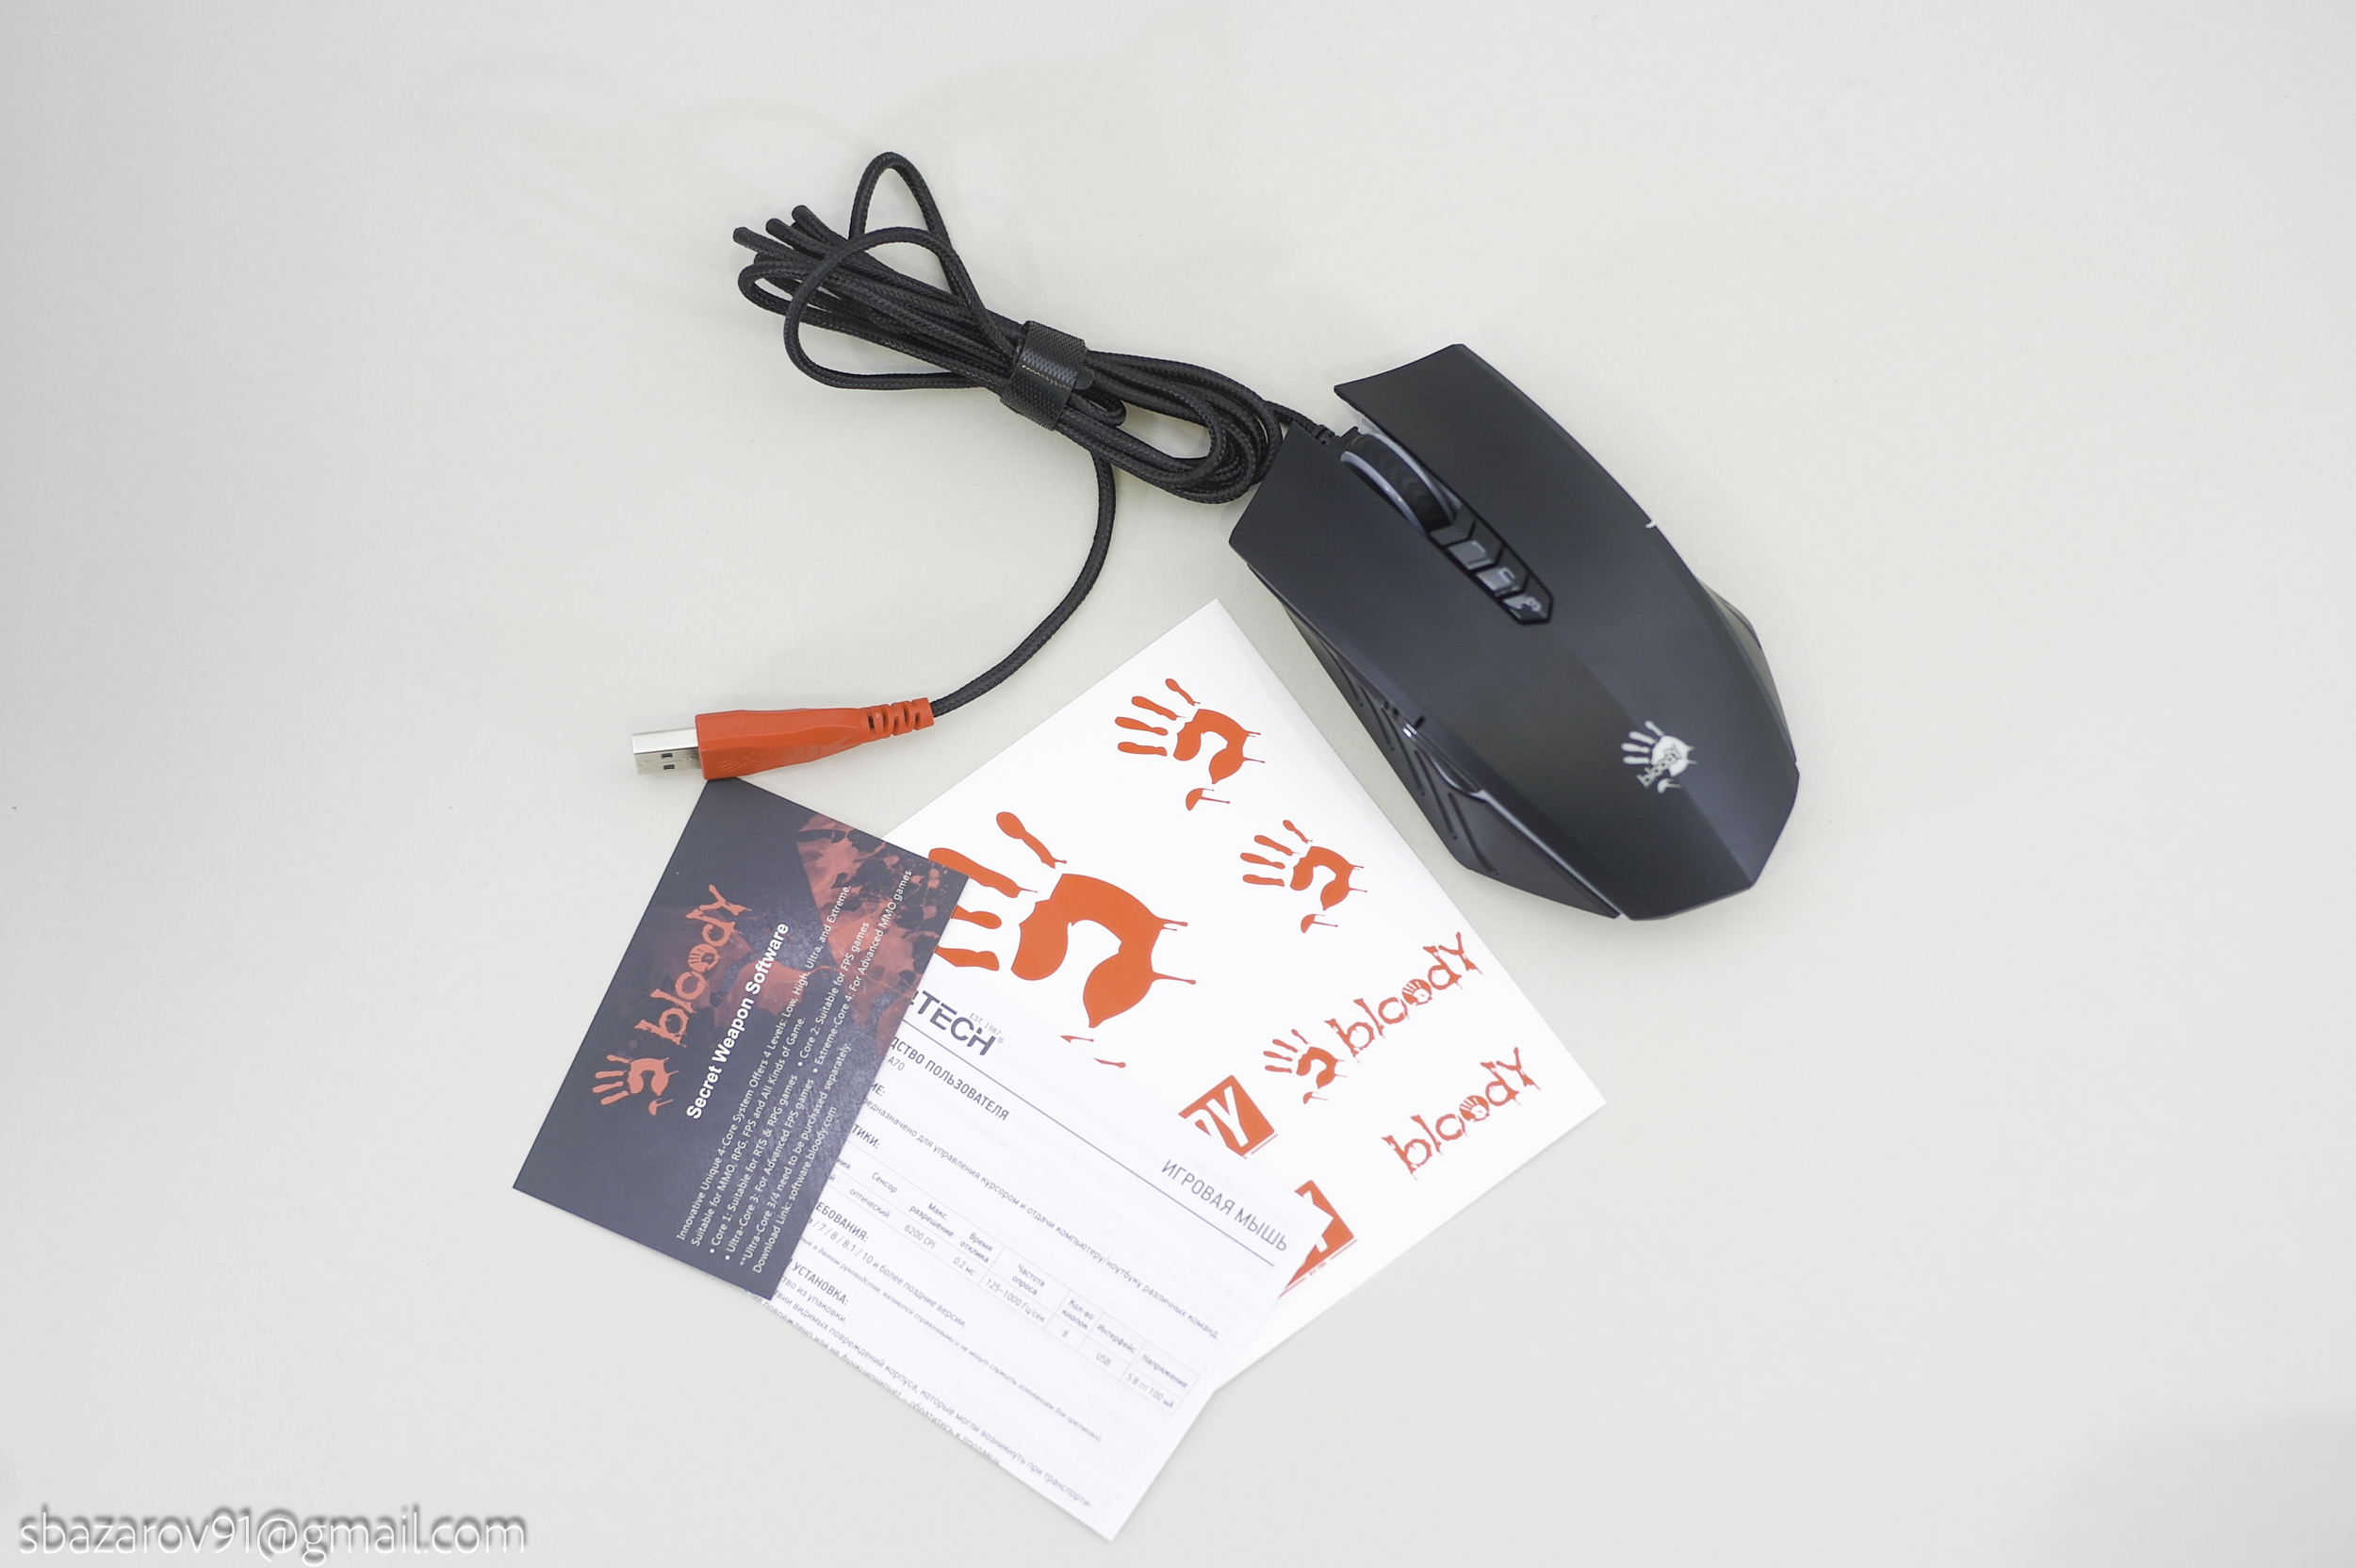 Disconnected eac blacklisted device bloody mouse a4tech rust что делать фото 101